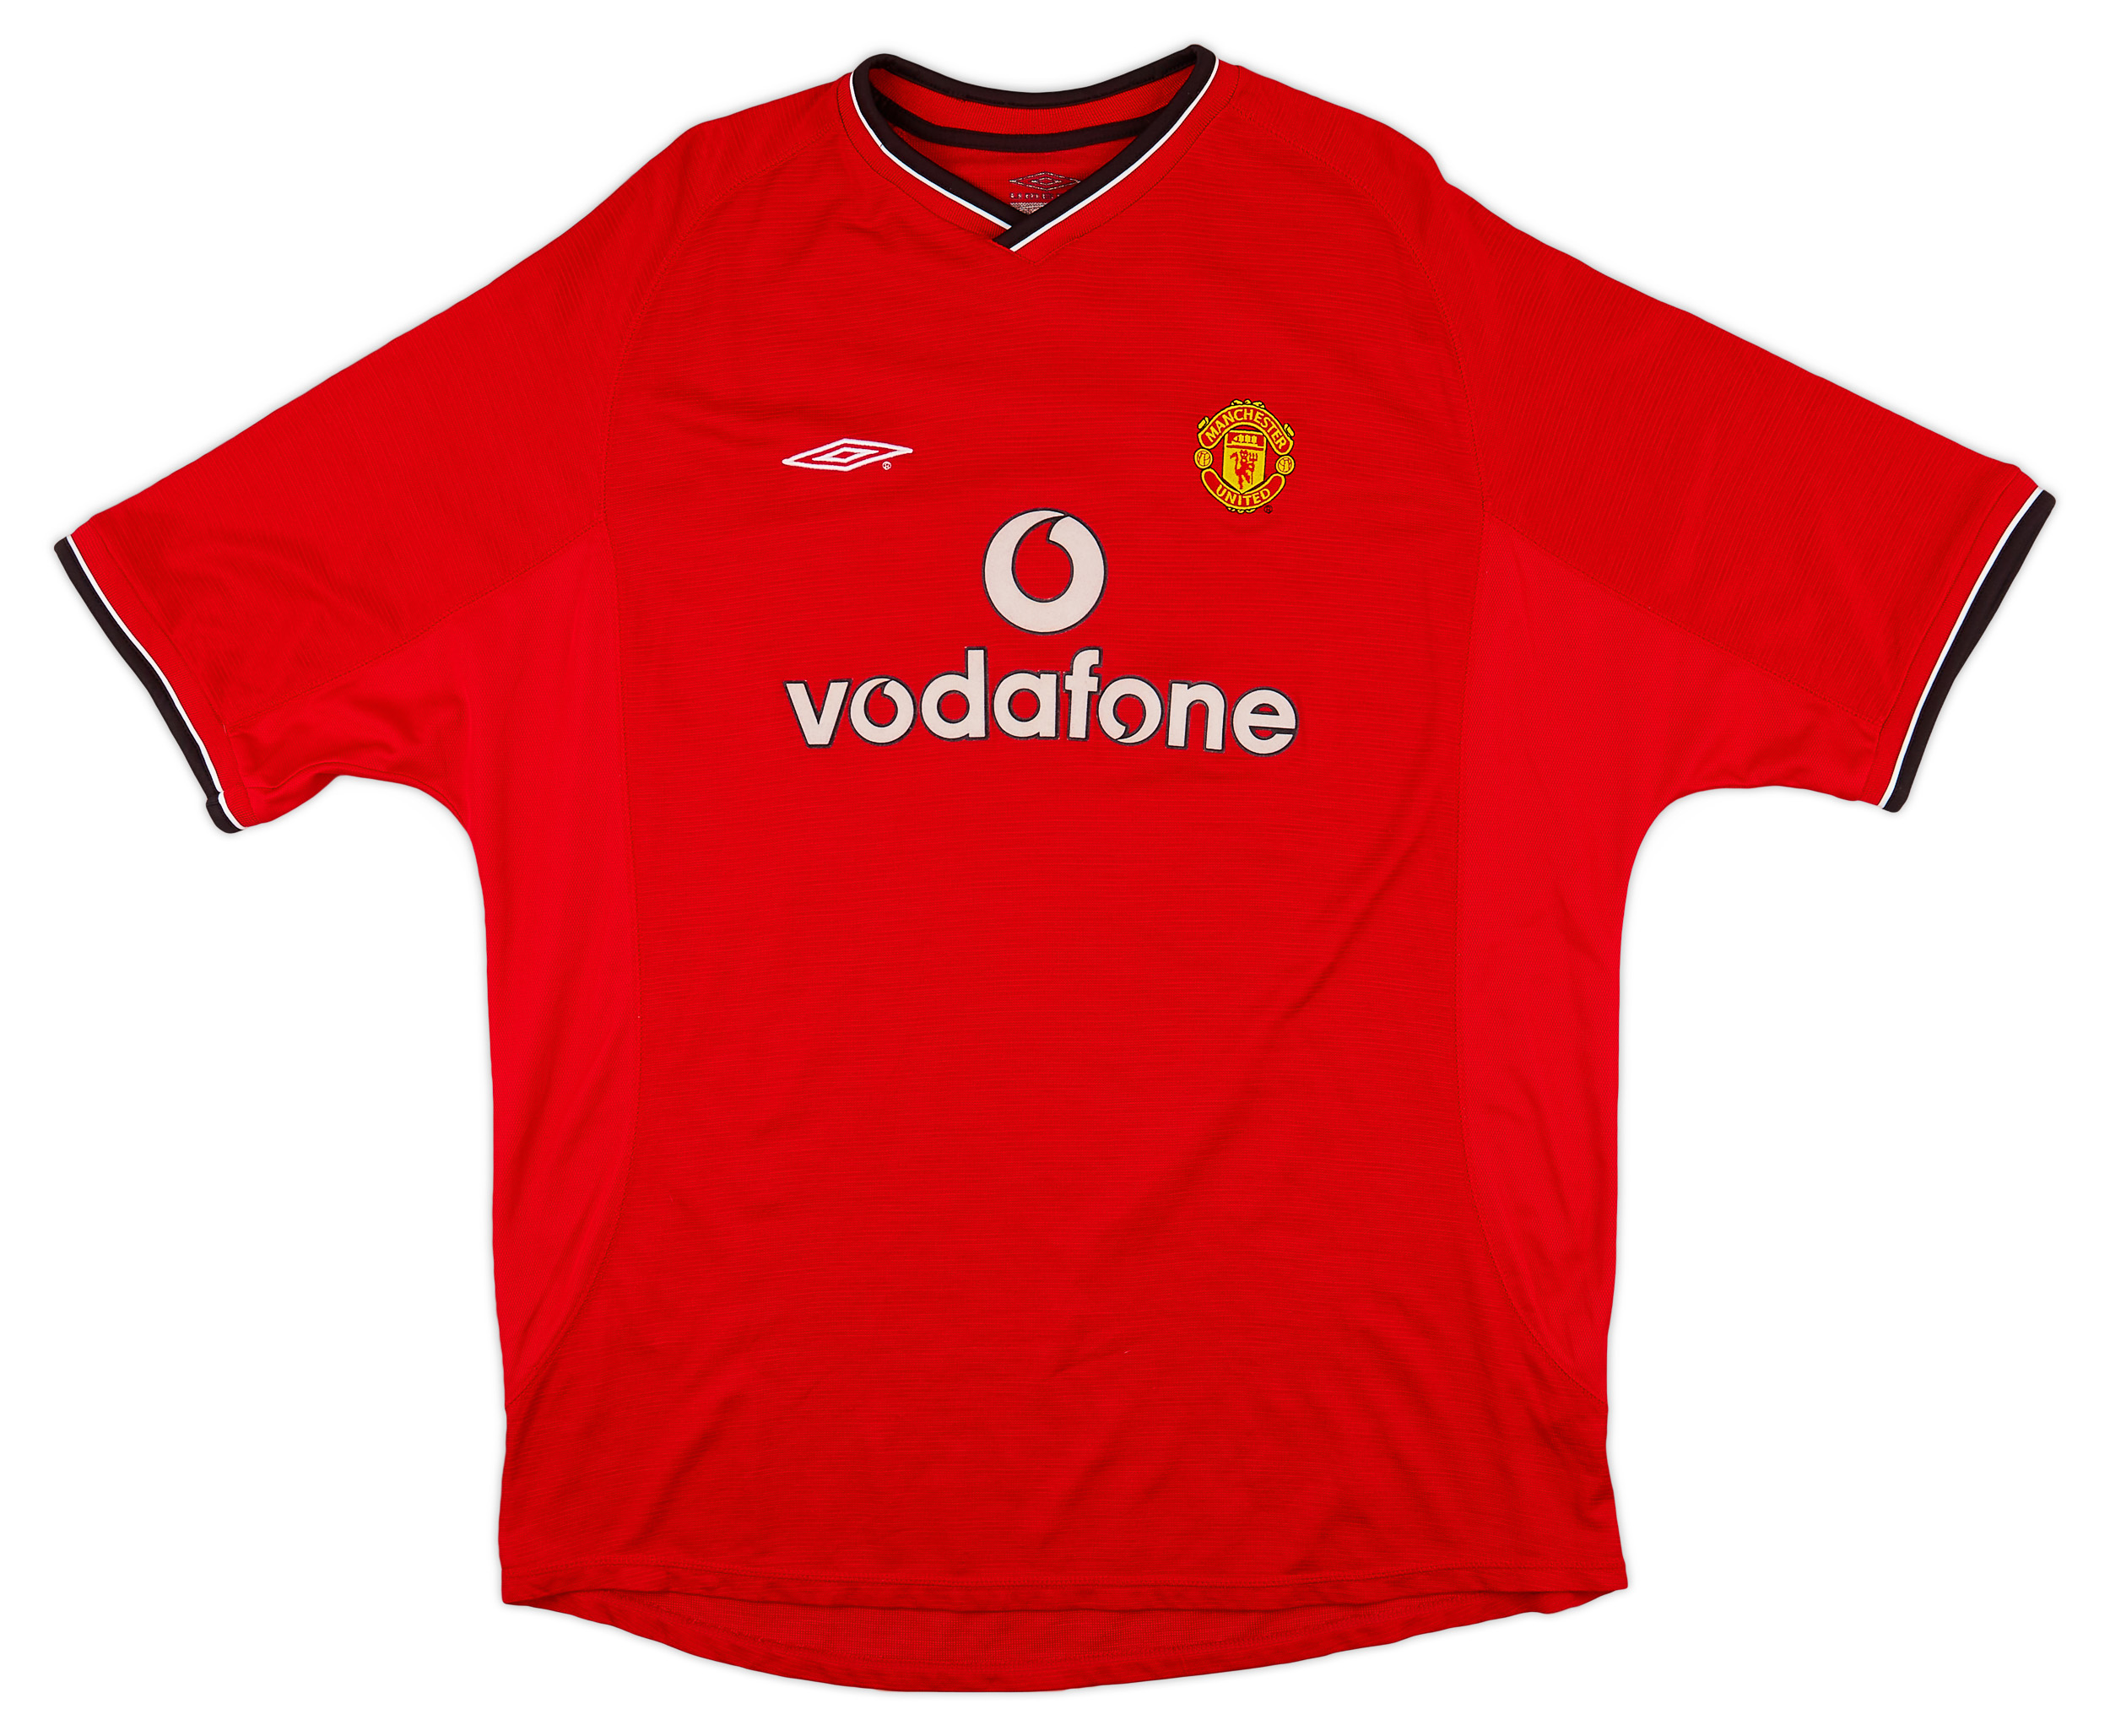 2000-02 Manchester United Home Shirt - Excellent 9/10 - ()